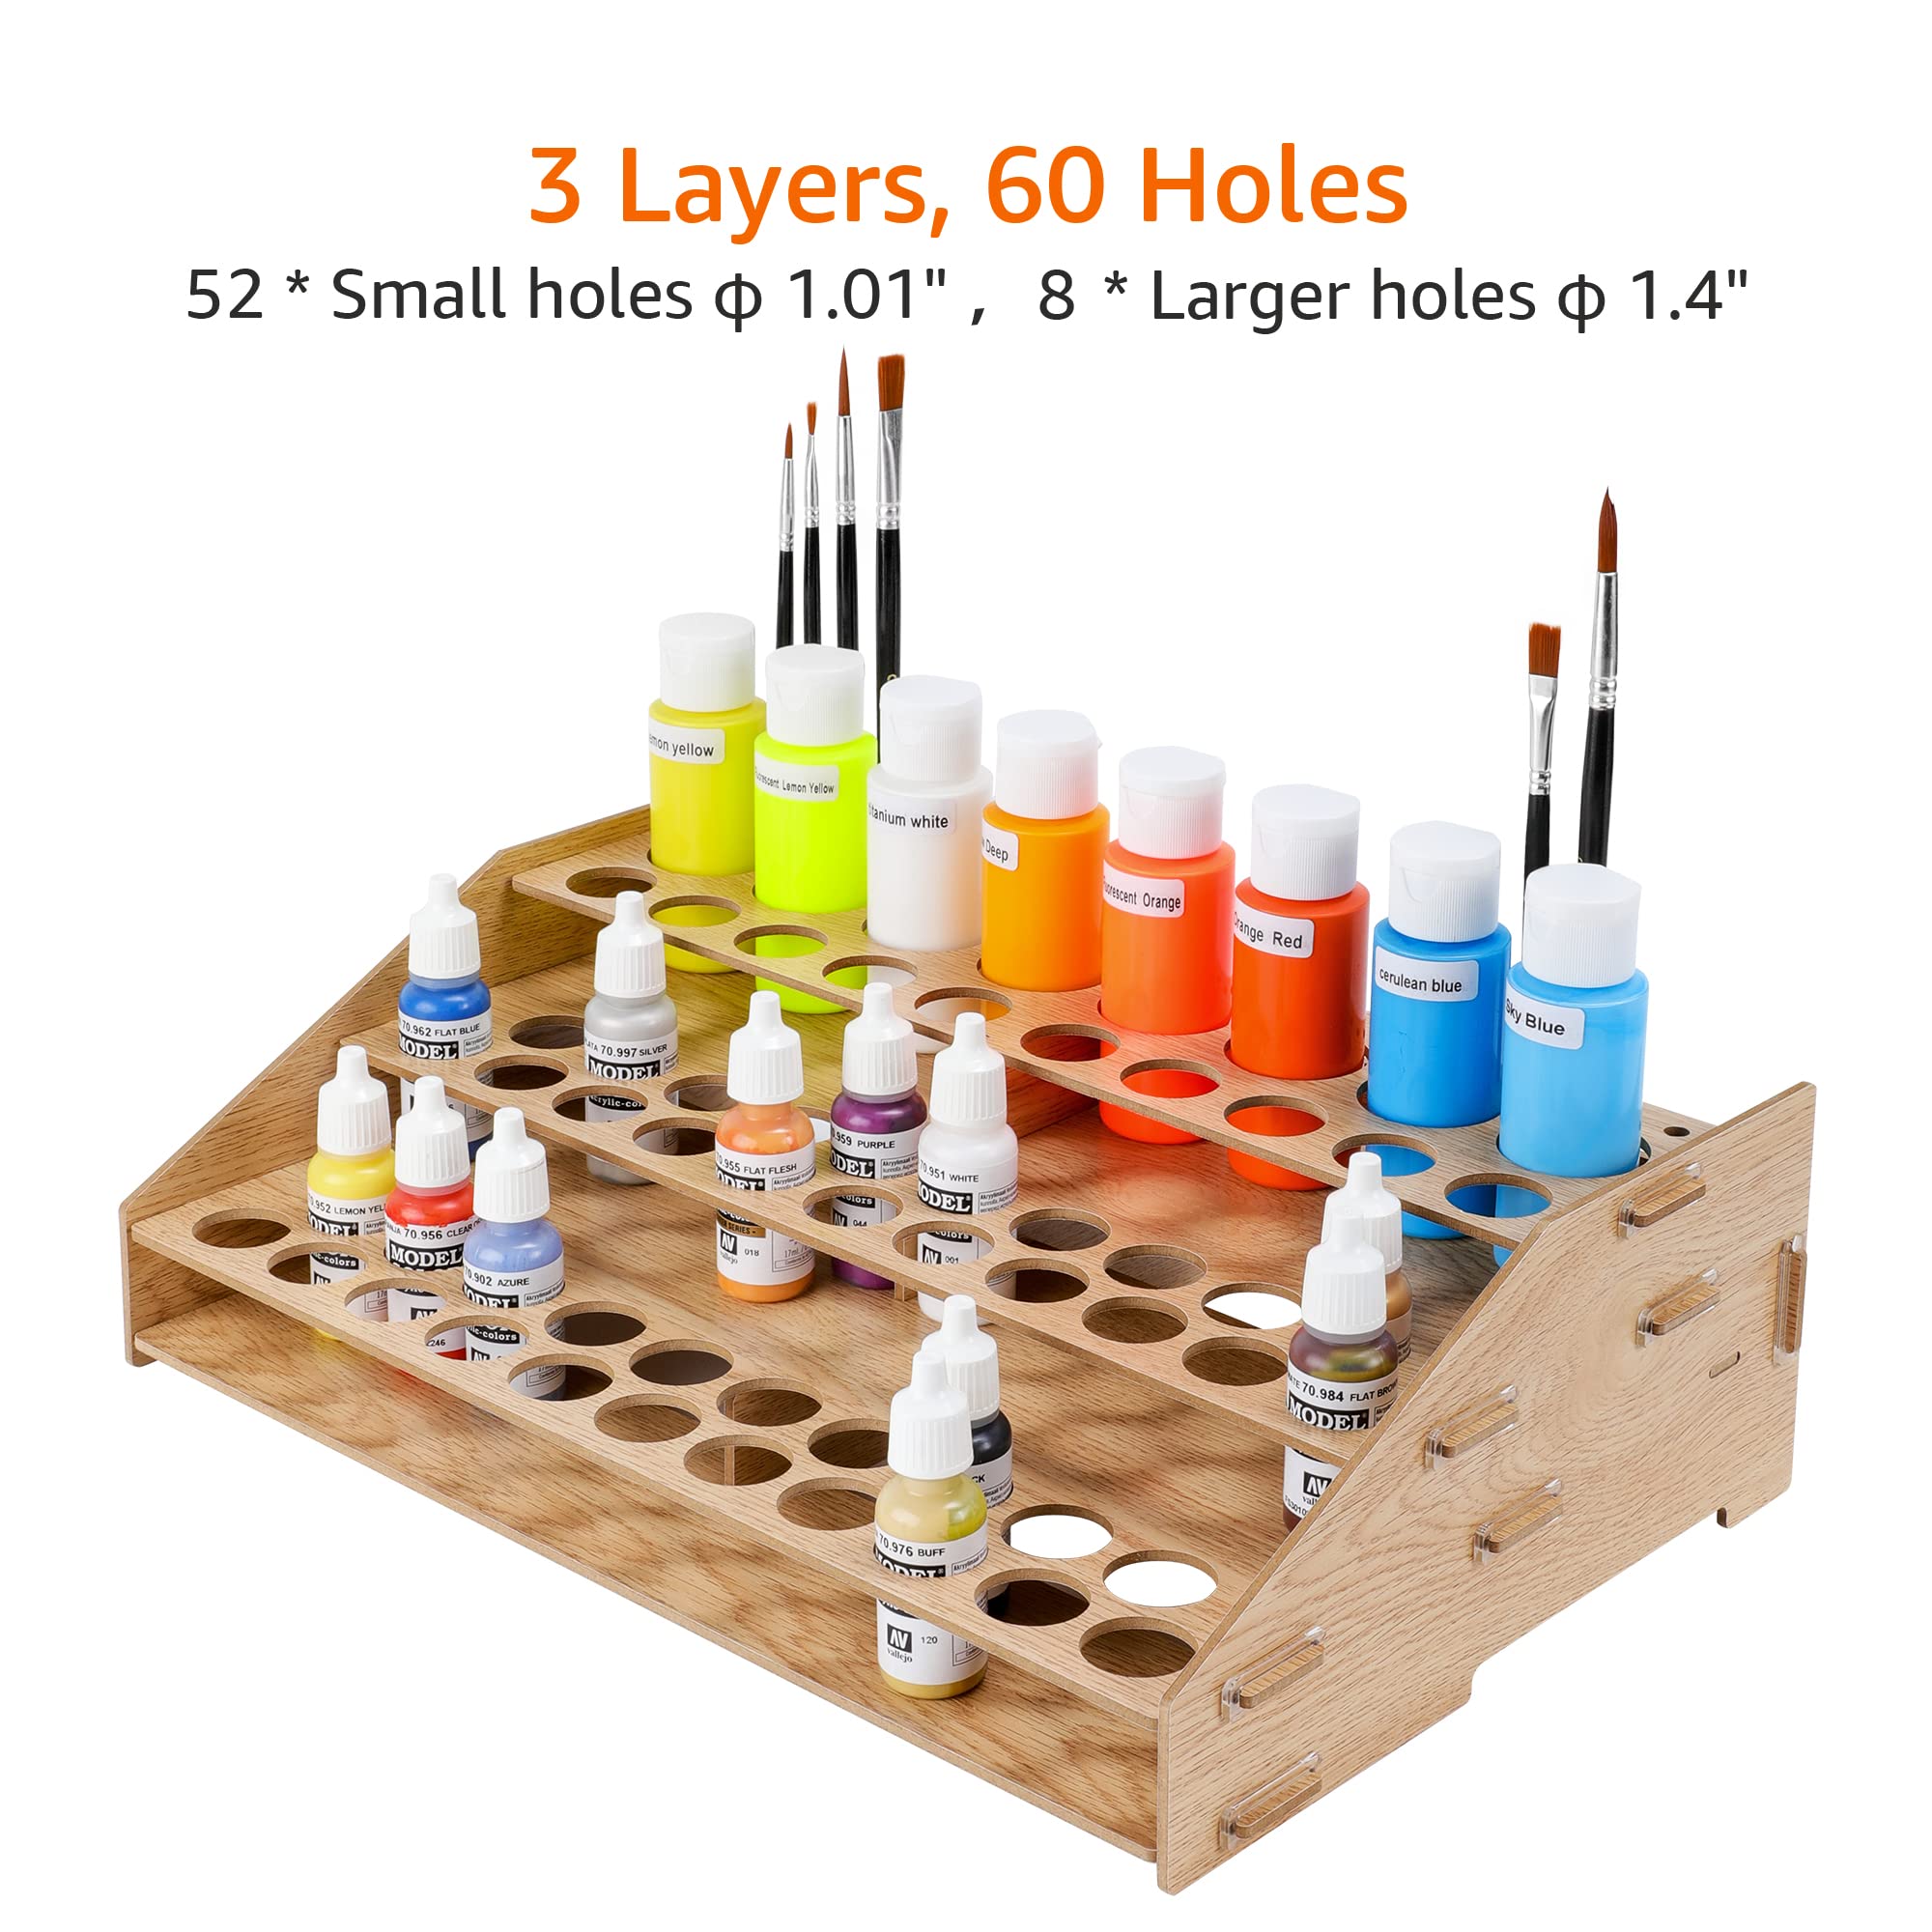 Amazon Basics Craft Paint & Brush Organizer Rack, Holds up to 60 Bottles (52 1-inch and 8 1.47-inch) and 22 brushes - 14 x 8 Inches, Wood Finish, Light brown, 14.1 x 9.6 x 4.3